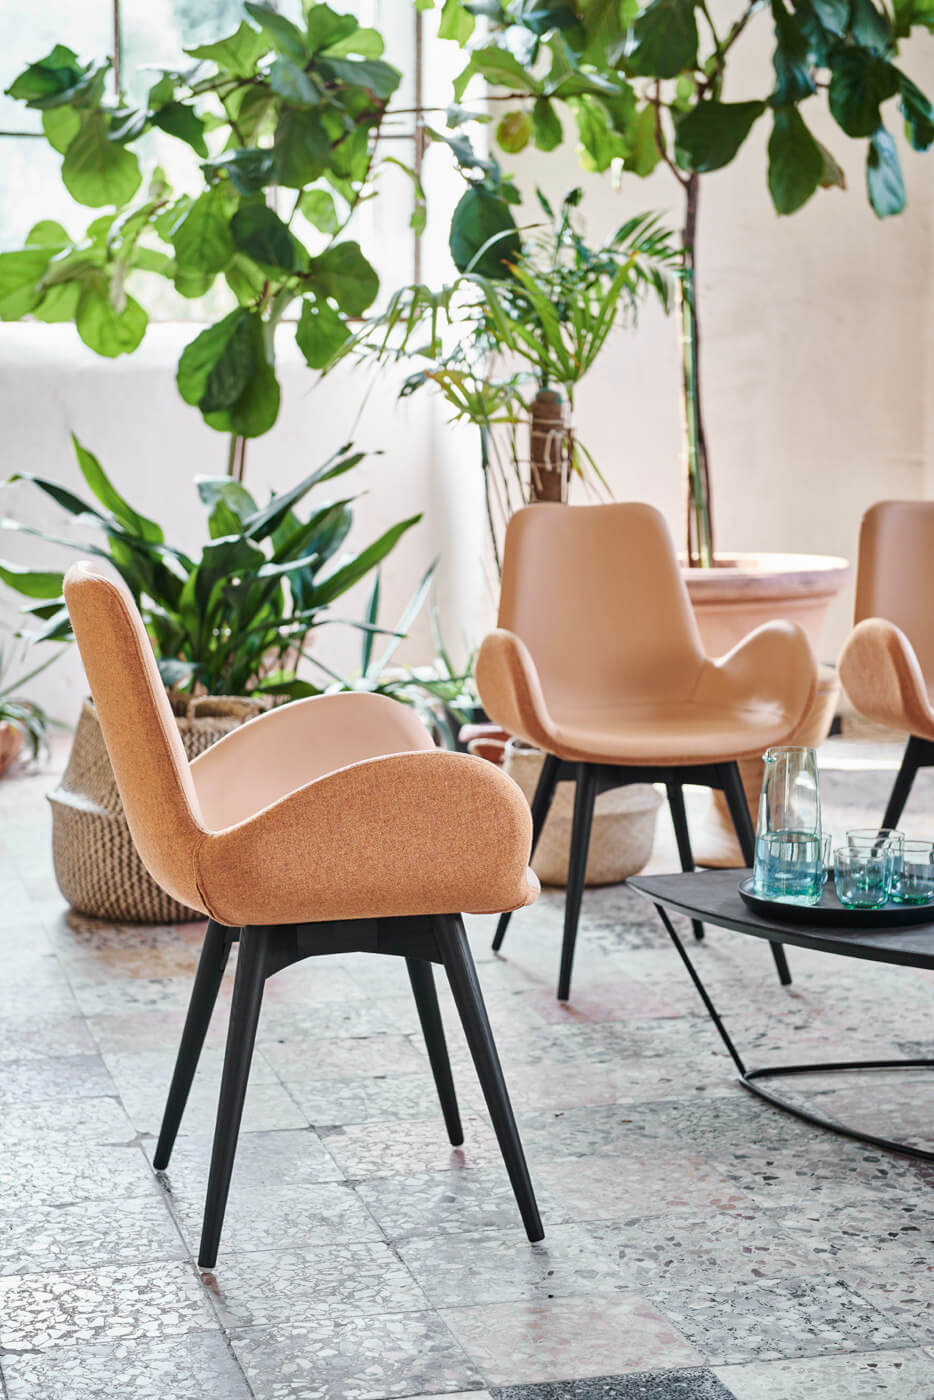 Dalia armchair with four-leg base in wood and cover in leather and pink fabric.